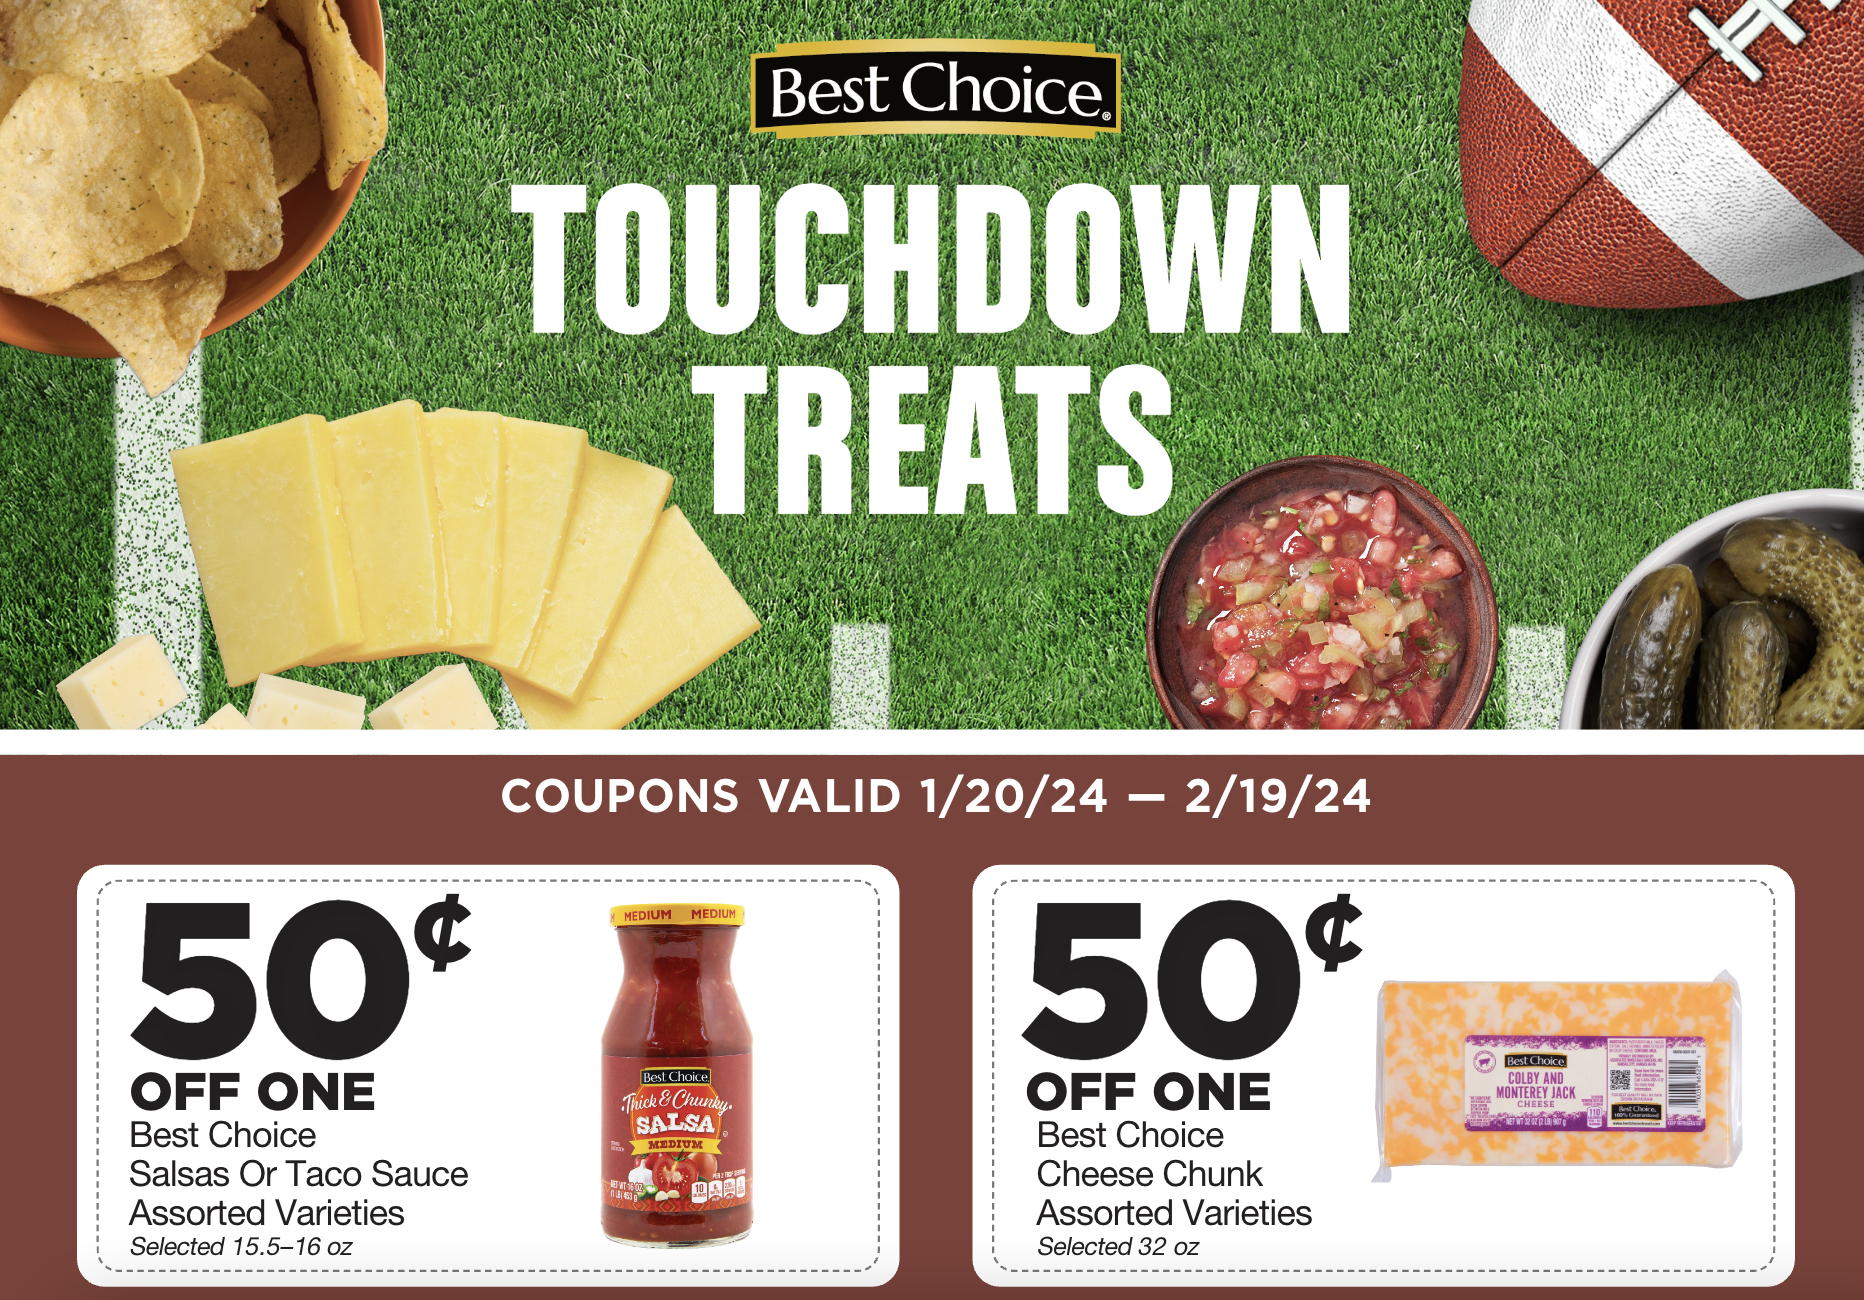 Best Choice Touchdown treats 2 coupons